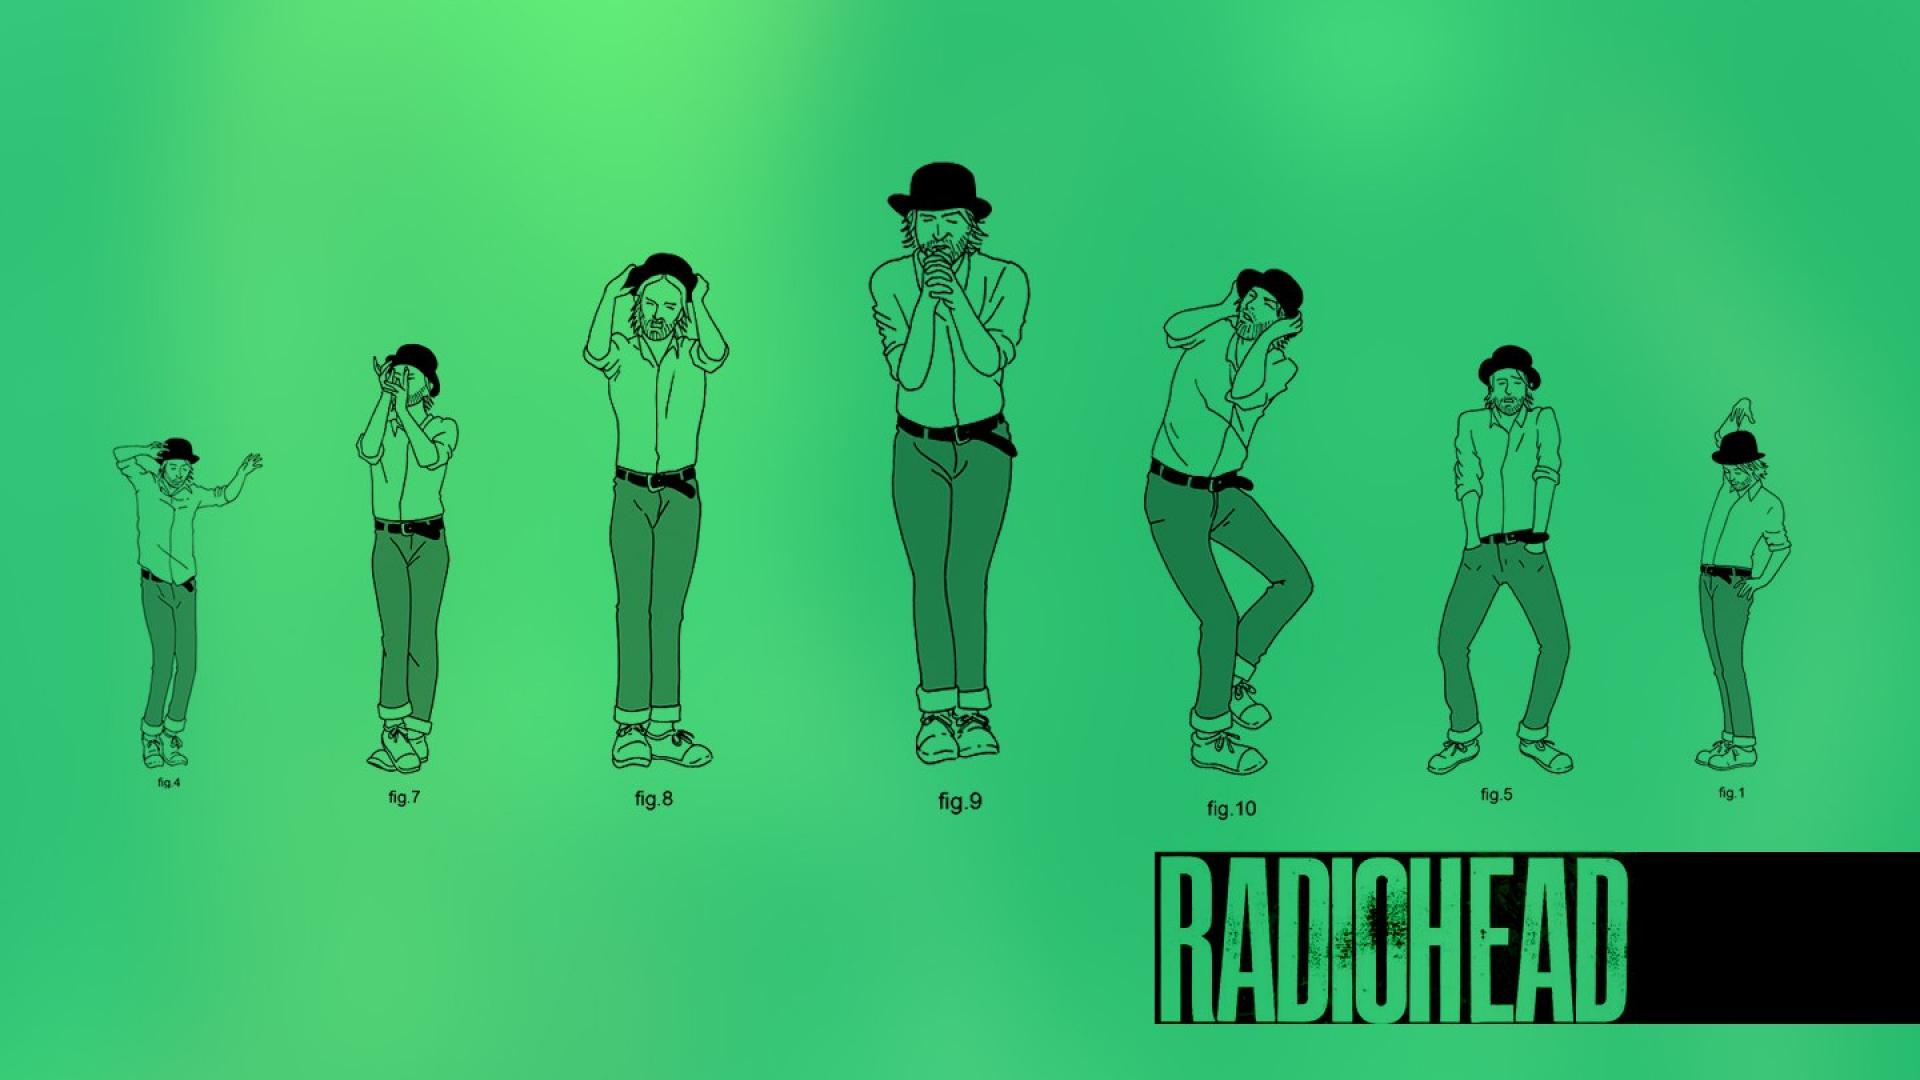 Radiohead wallpaper 1440x900 - - High Quality and other